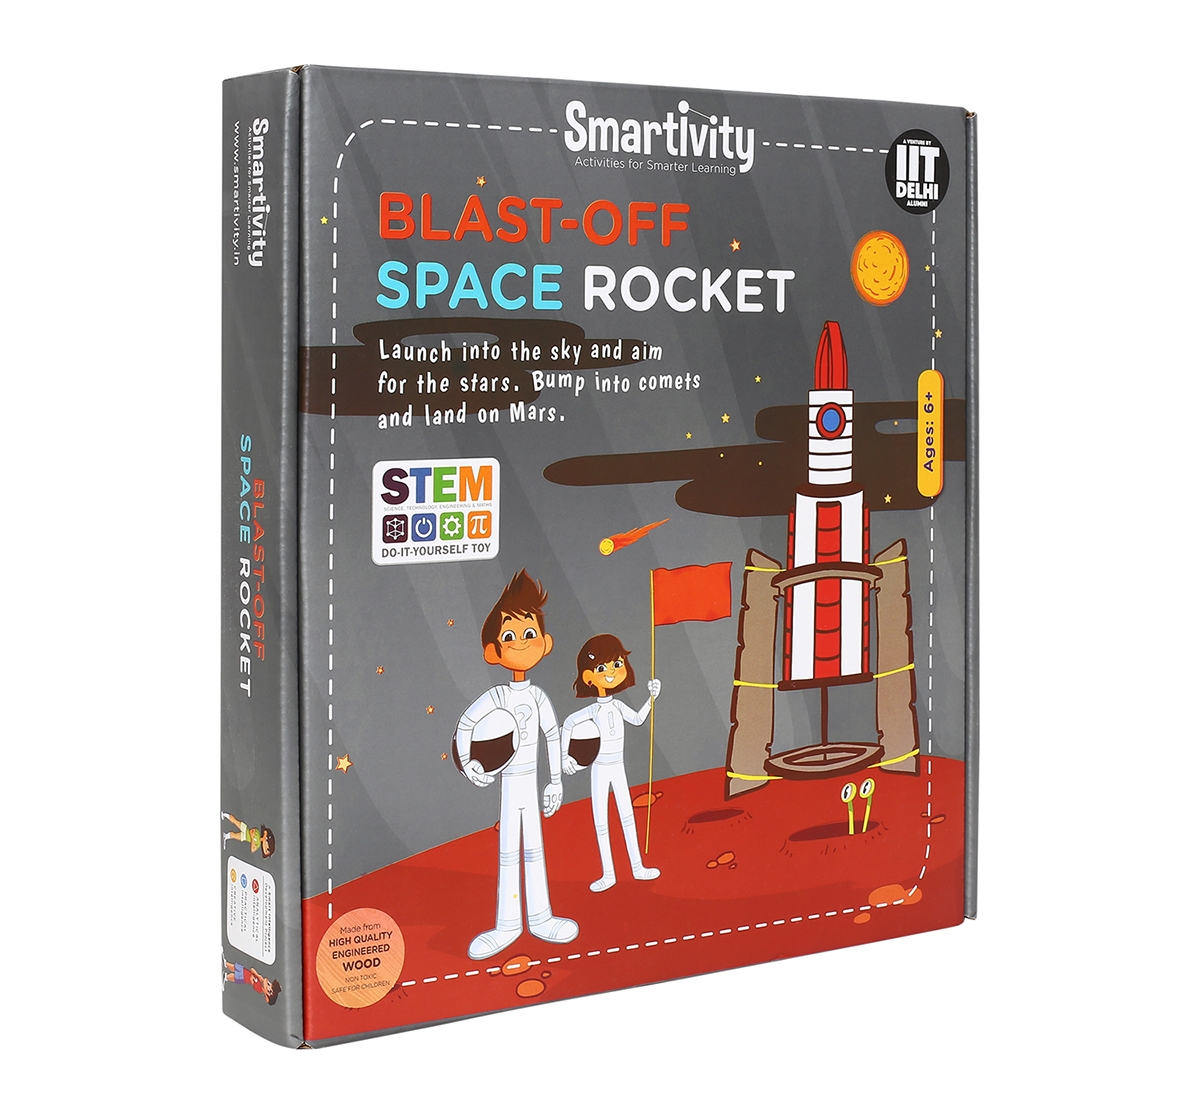 Smartivity | Smartivity Space Rocket Blast-off Action STEM Toy, Educational & Construction based DIY Fun Activity Game for Kids 6 to 14, Gifts for Boys & Girls, Learn Science Engineering Project, Made in India 2